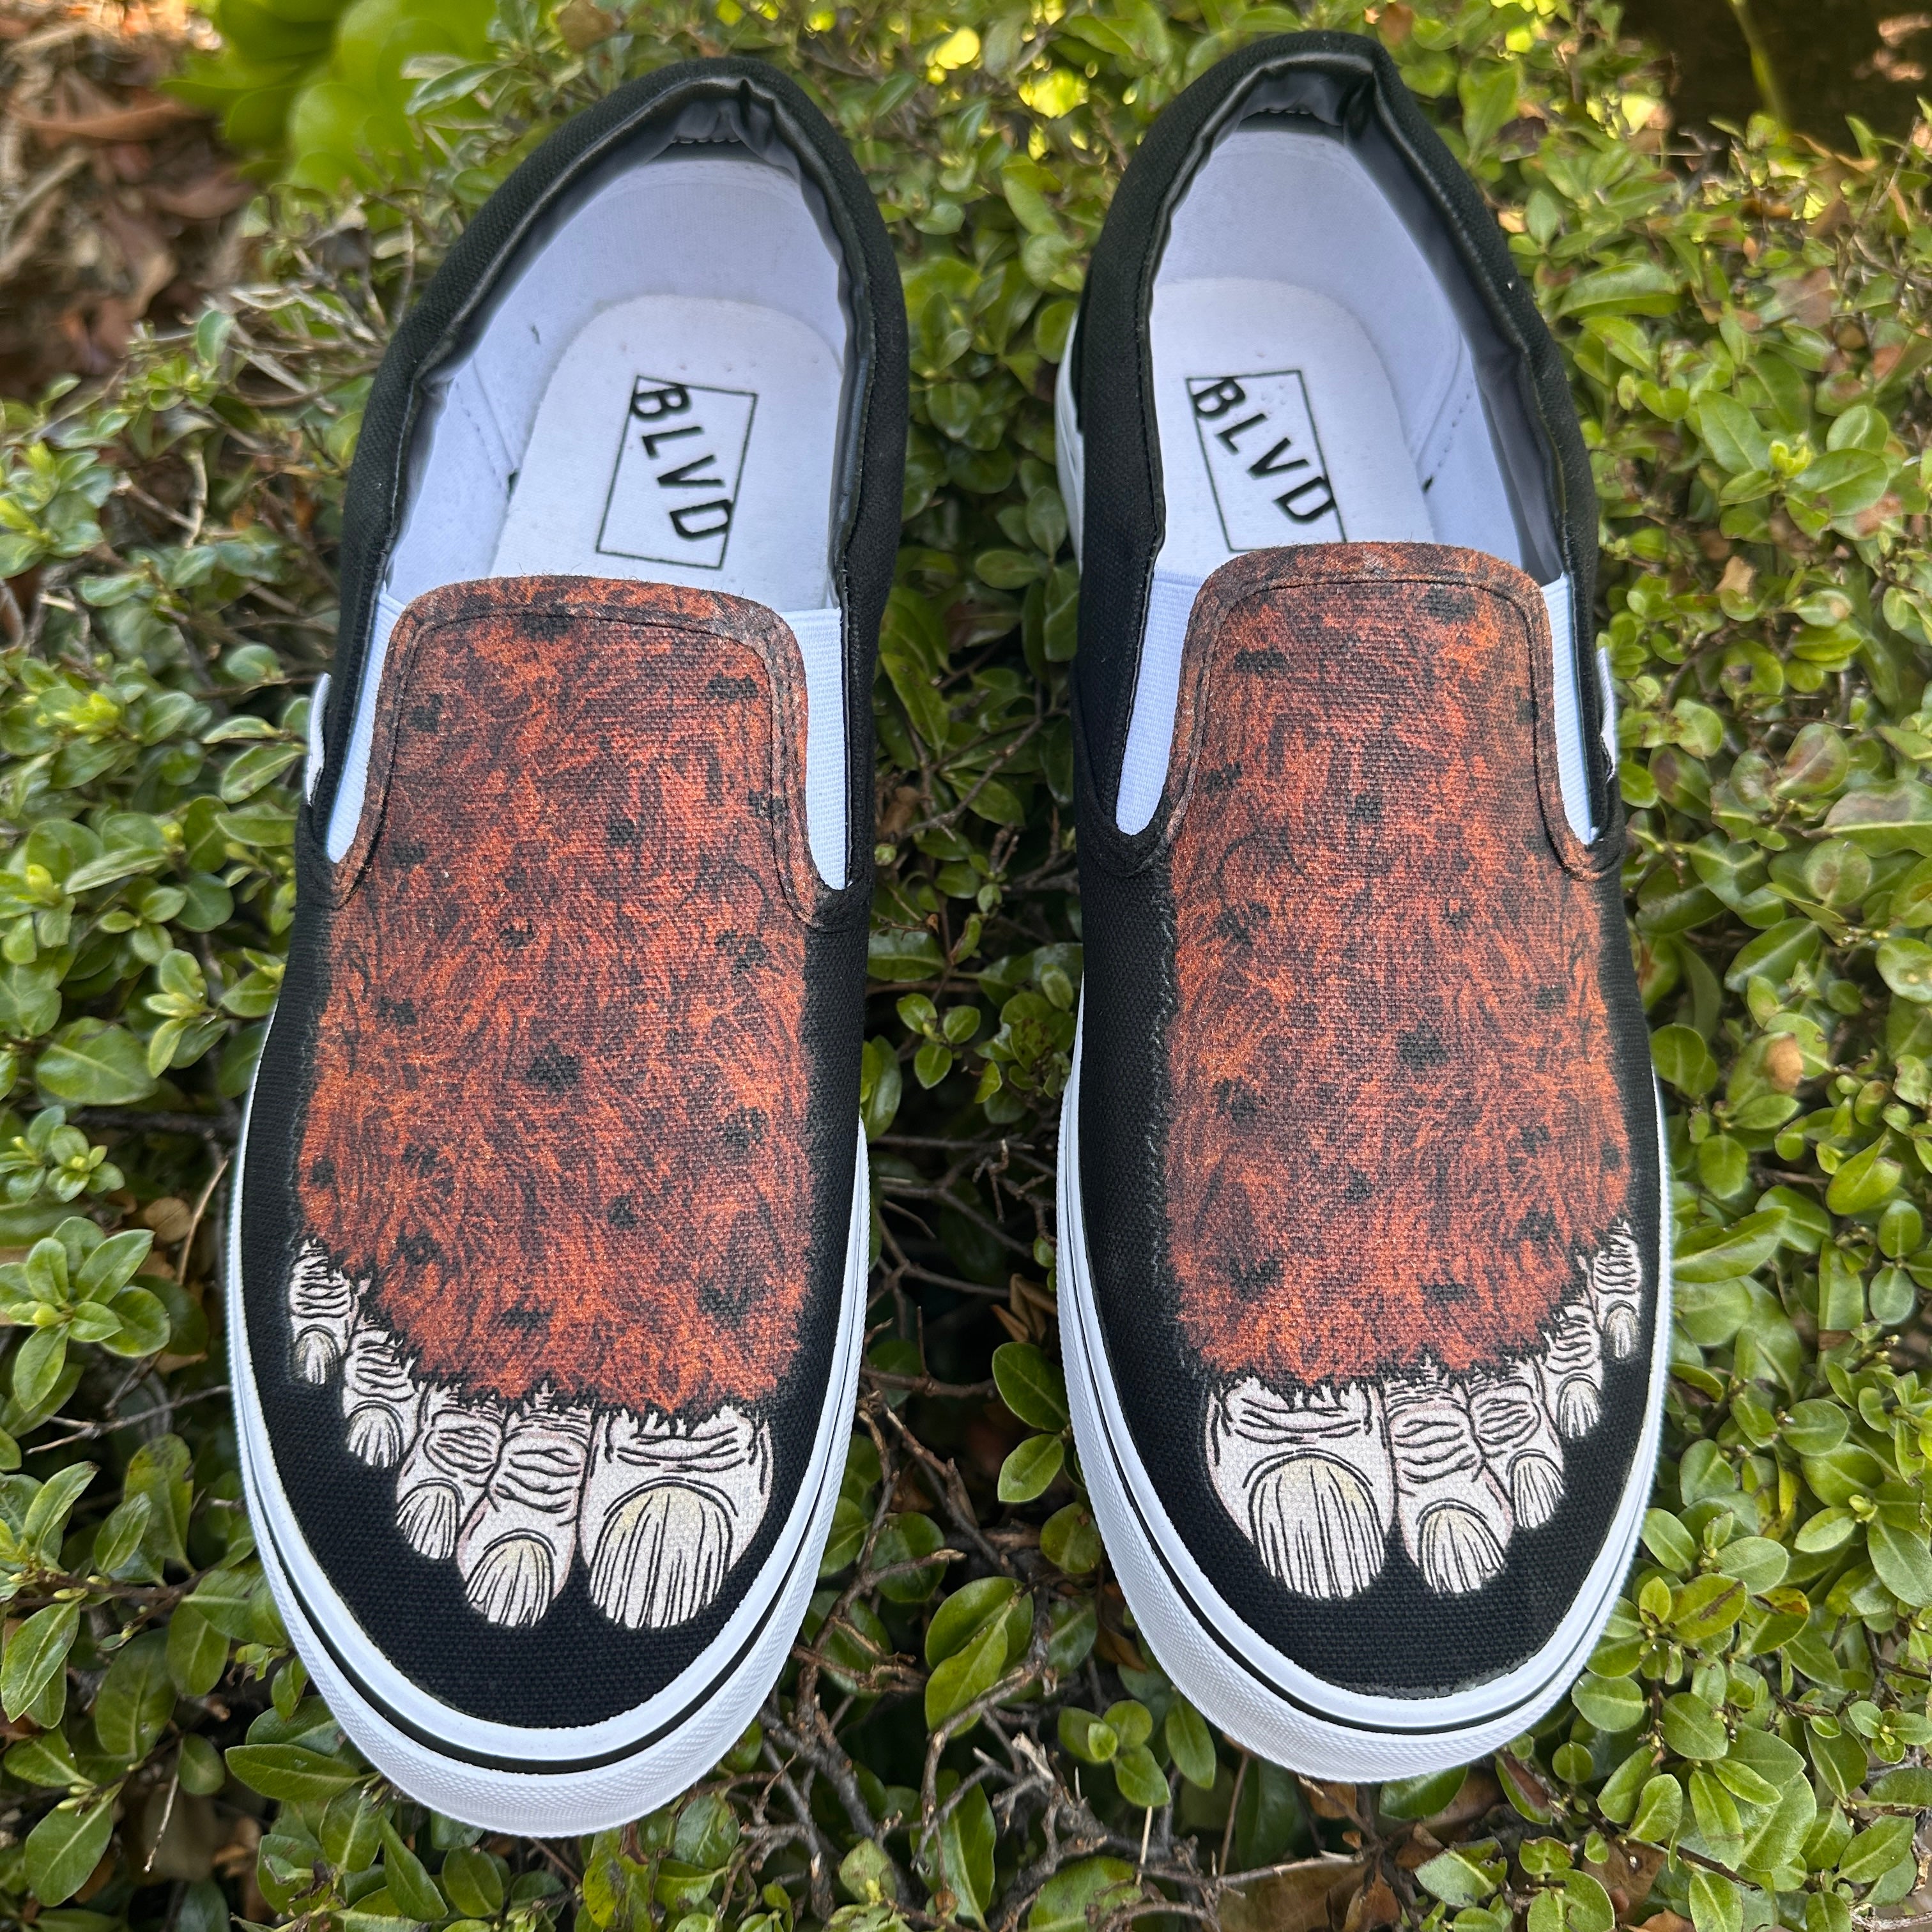 Big Foot Custom BLVD Slip On Shoes - Sasquatch Shoes for Men and Women